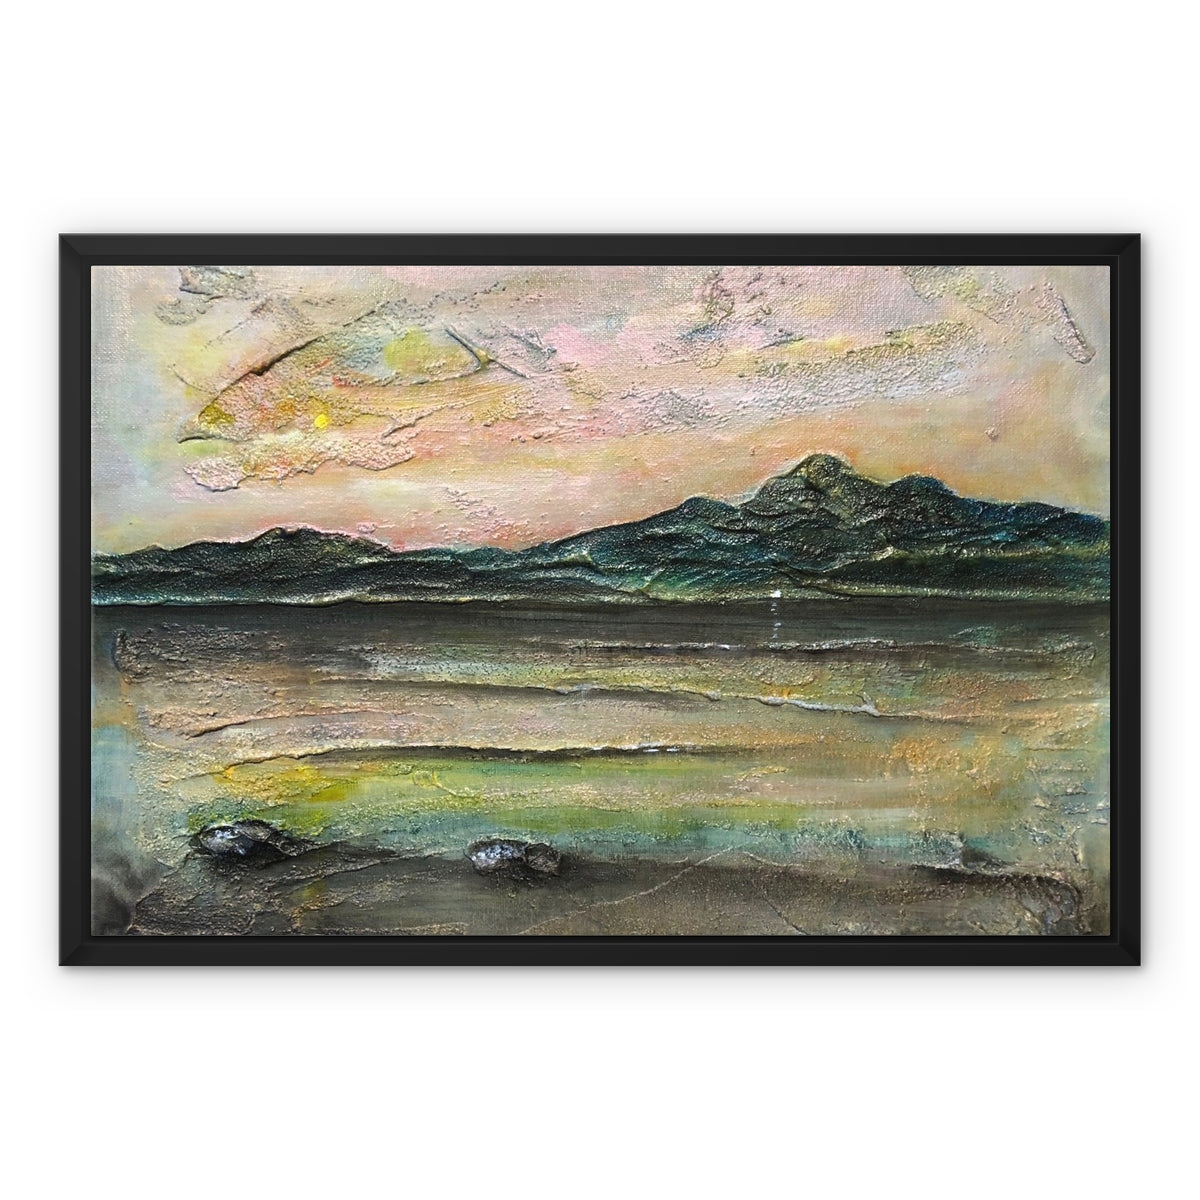 An Ethereal Loch Na Dal Skye Painting | Framed Canvas-Floating Framed Canvas Prints-Scottish Lochs & Mountains Art Gallery-24"x18"-Black Frame-White Wrap-Paintings, Prints, Homeware, Art Gifts From Scotland By Scottish Artist Kevin Hunter